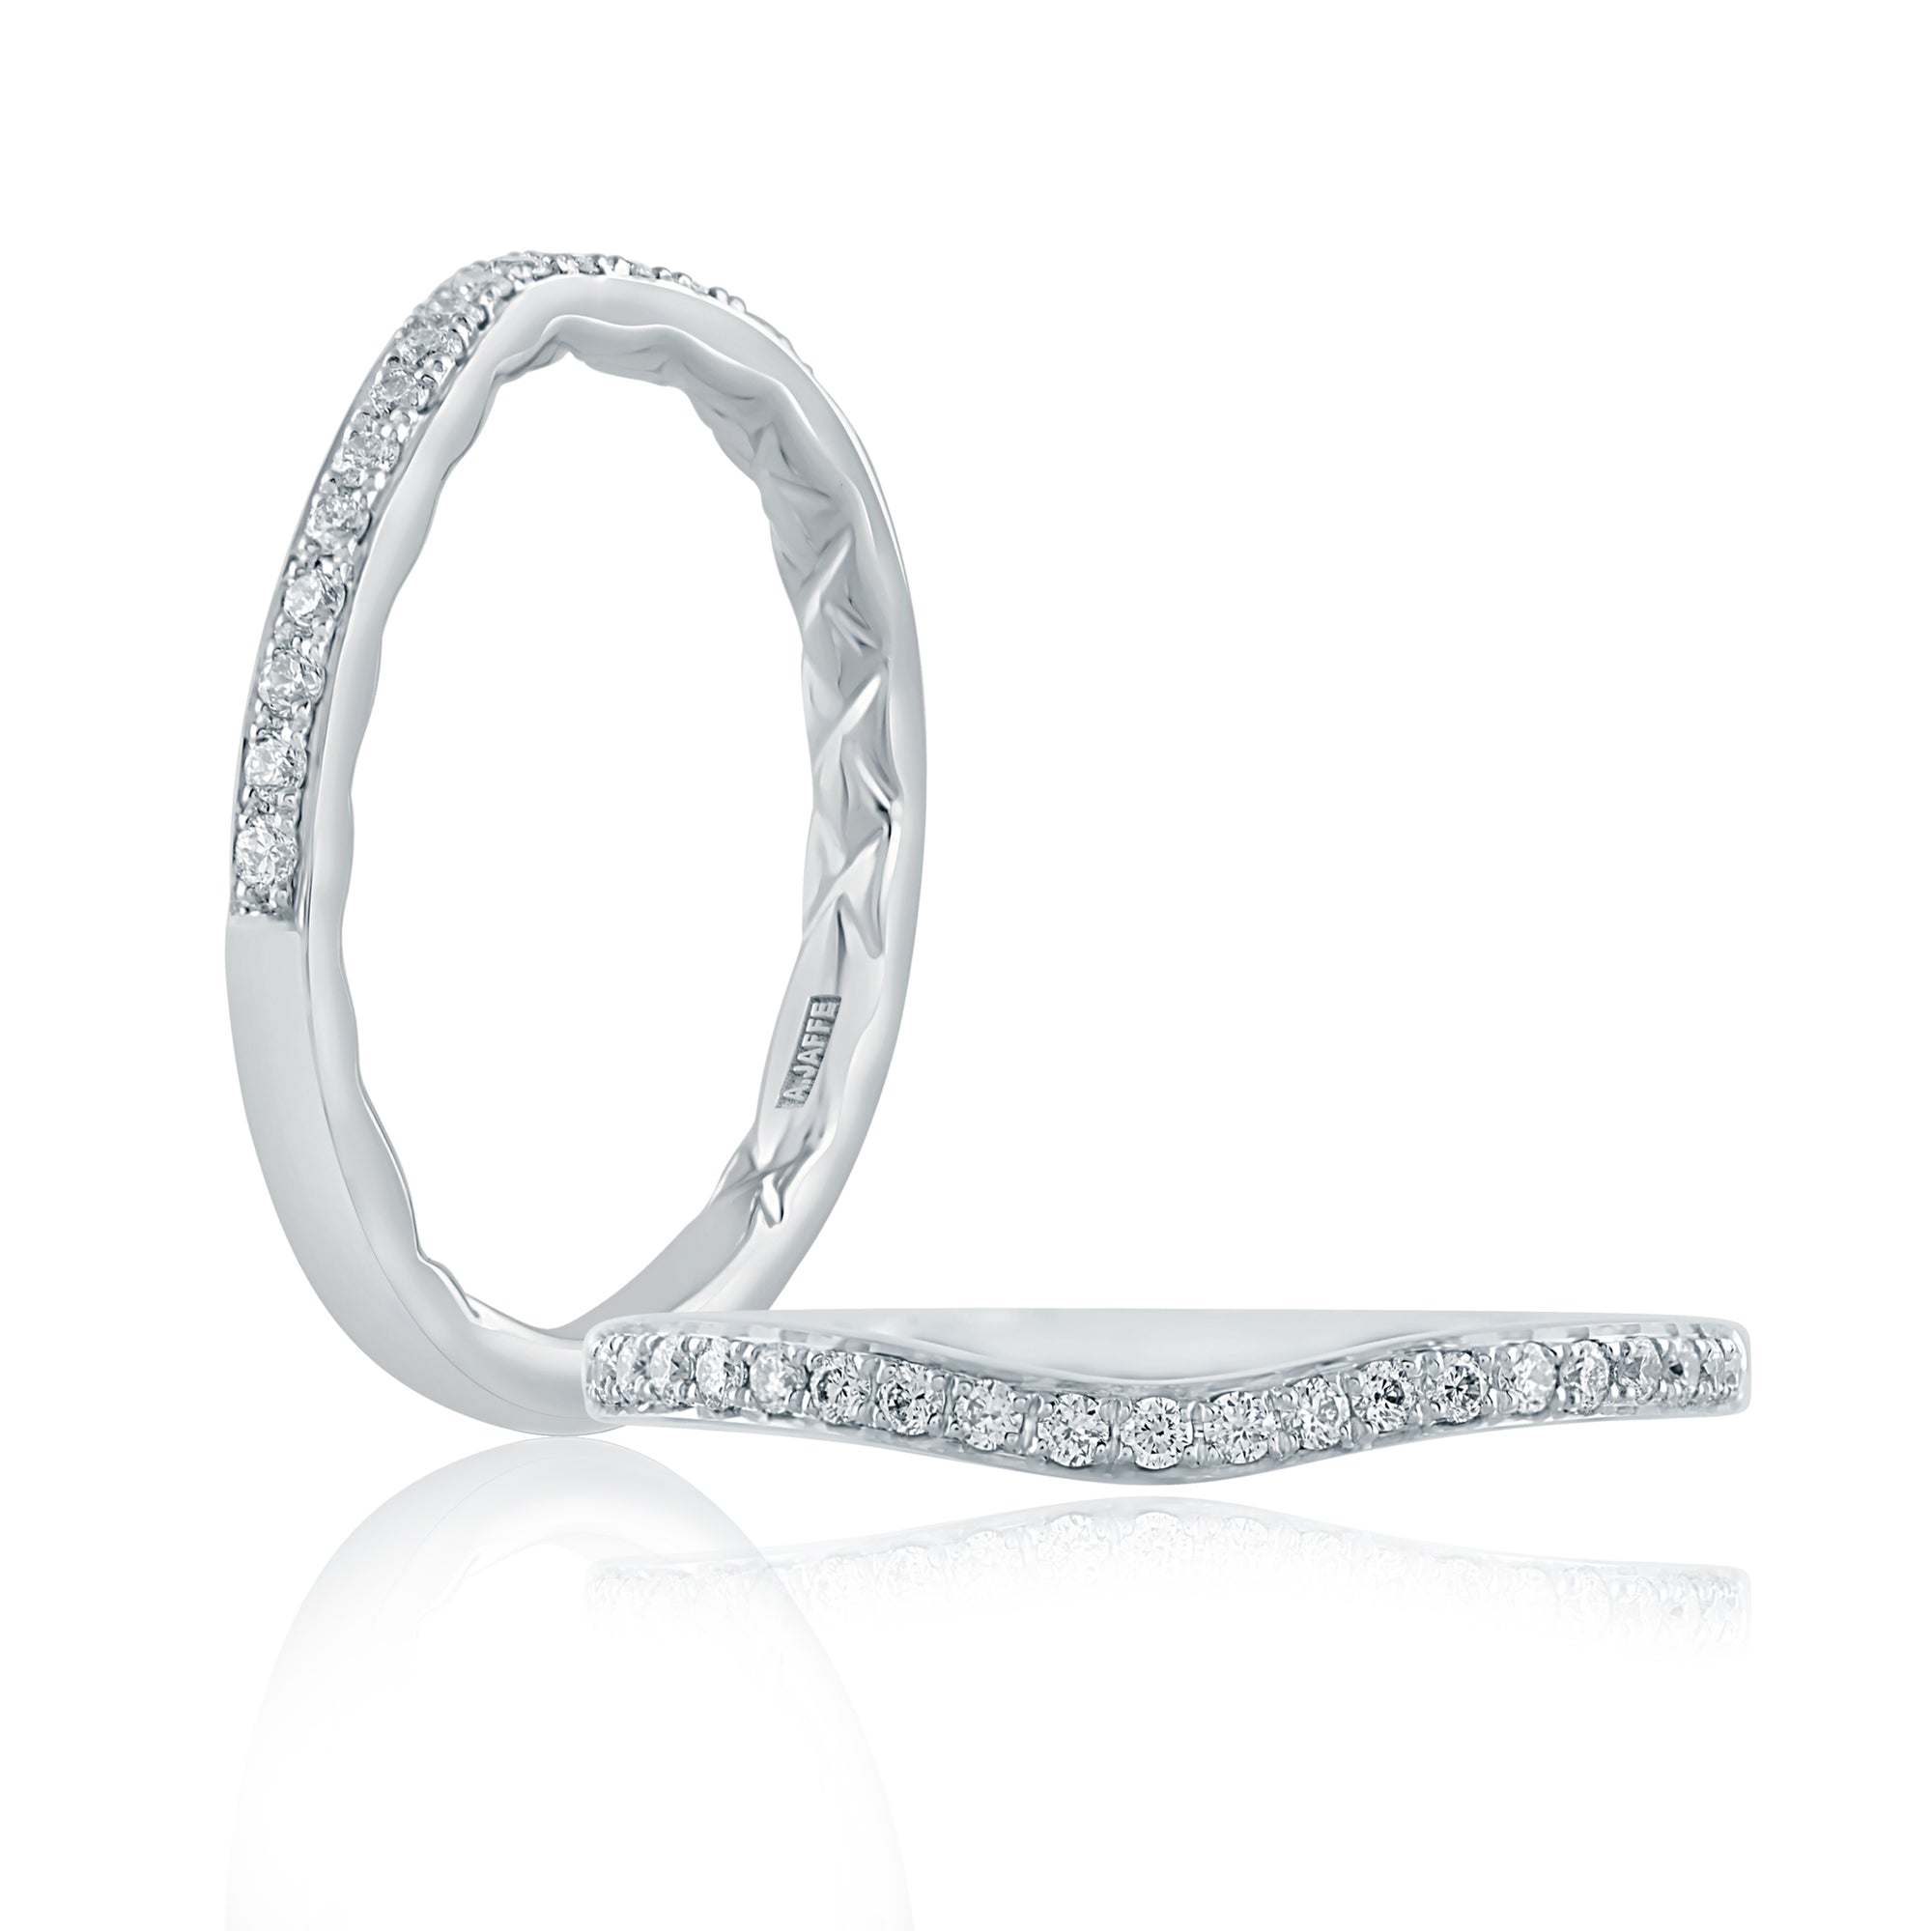 A.Jaffe Contoured Micro Pavé Diamond Quilted Wedding Band MR2025Q/16